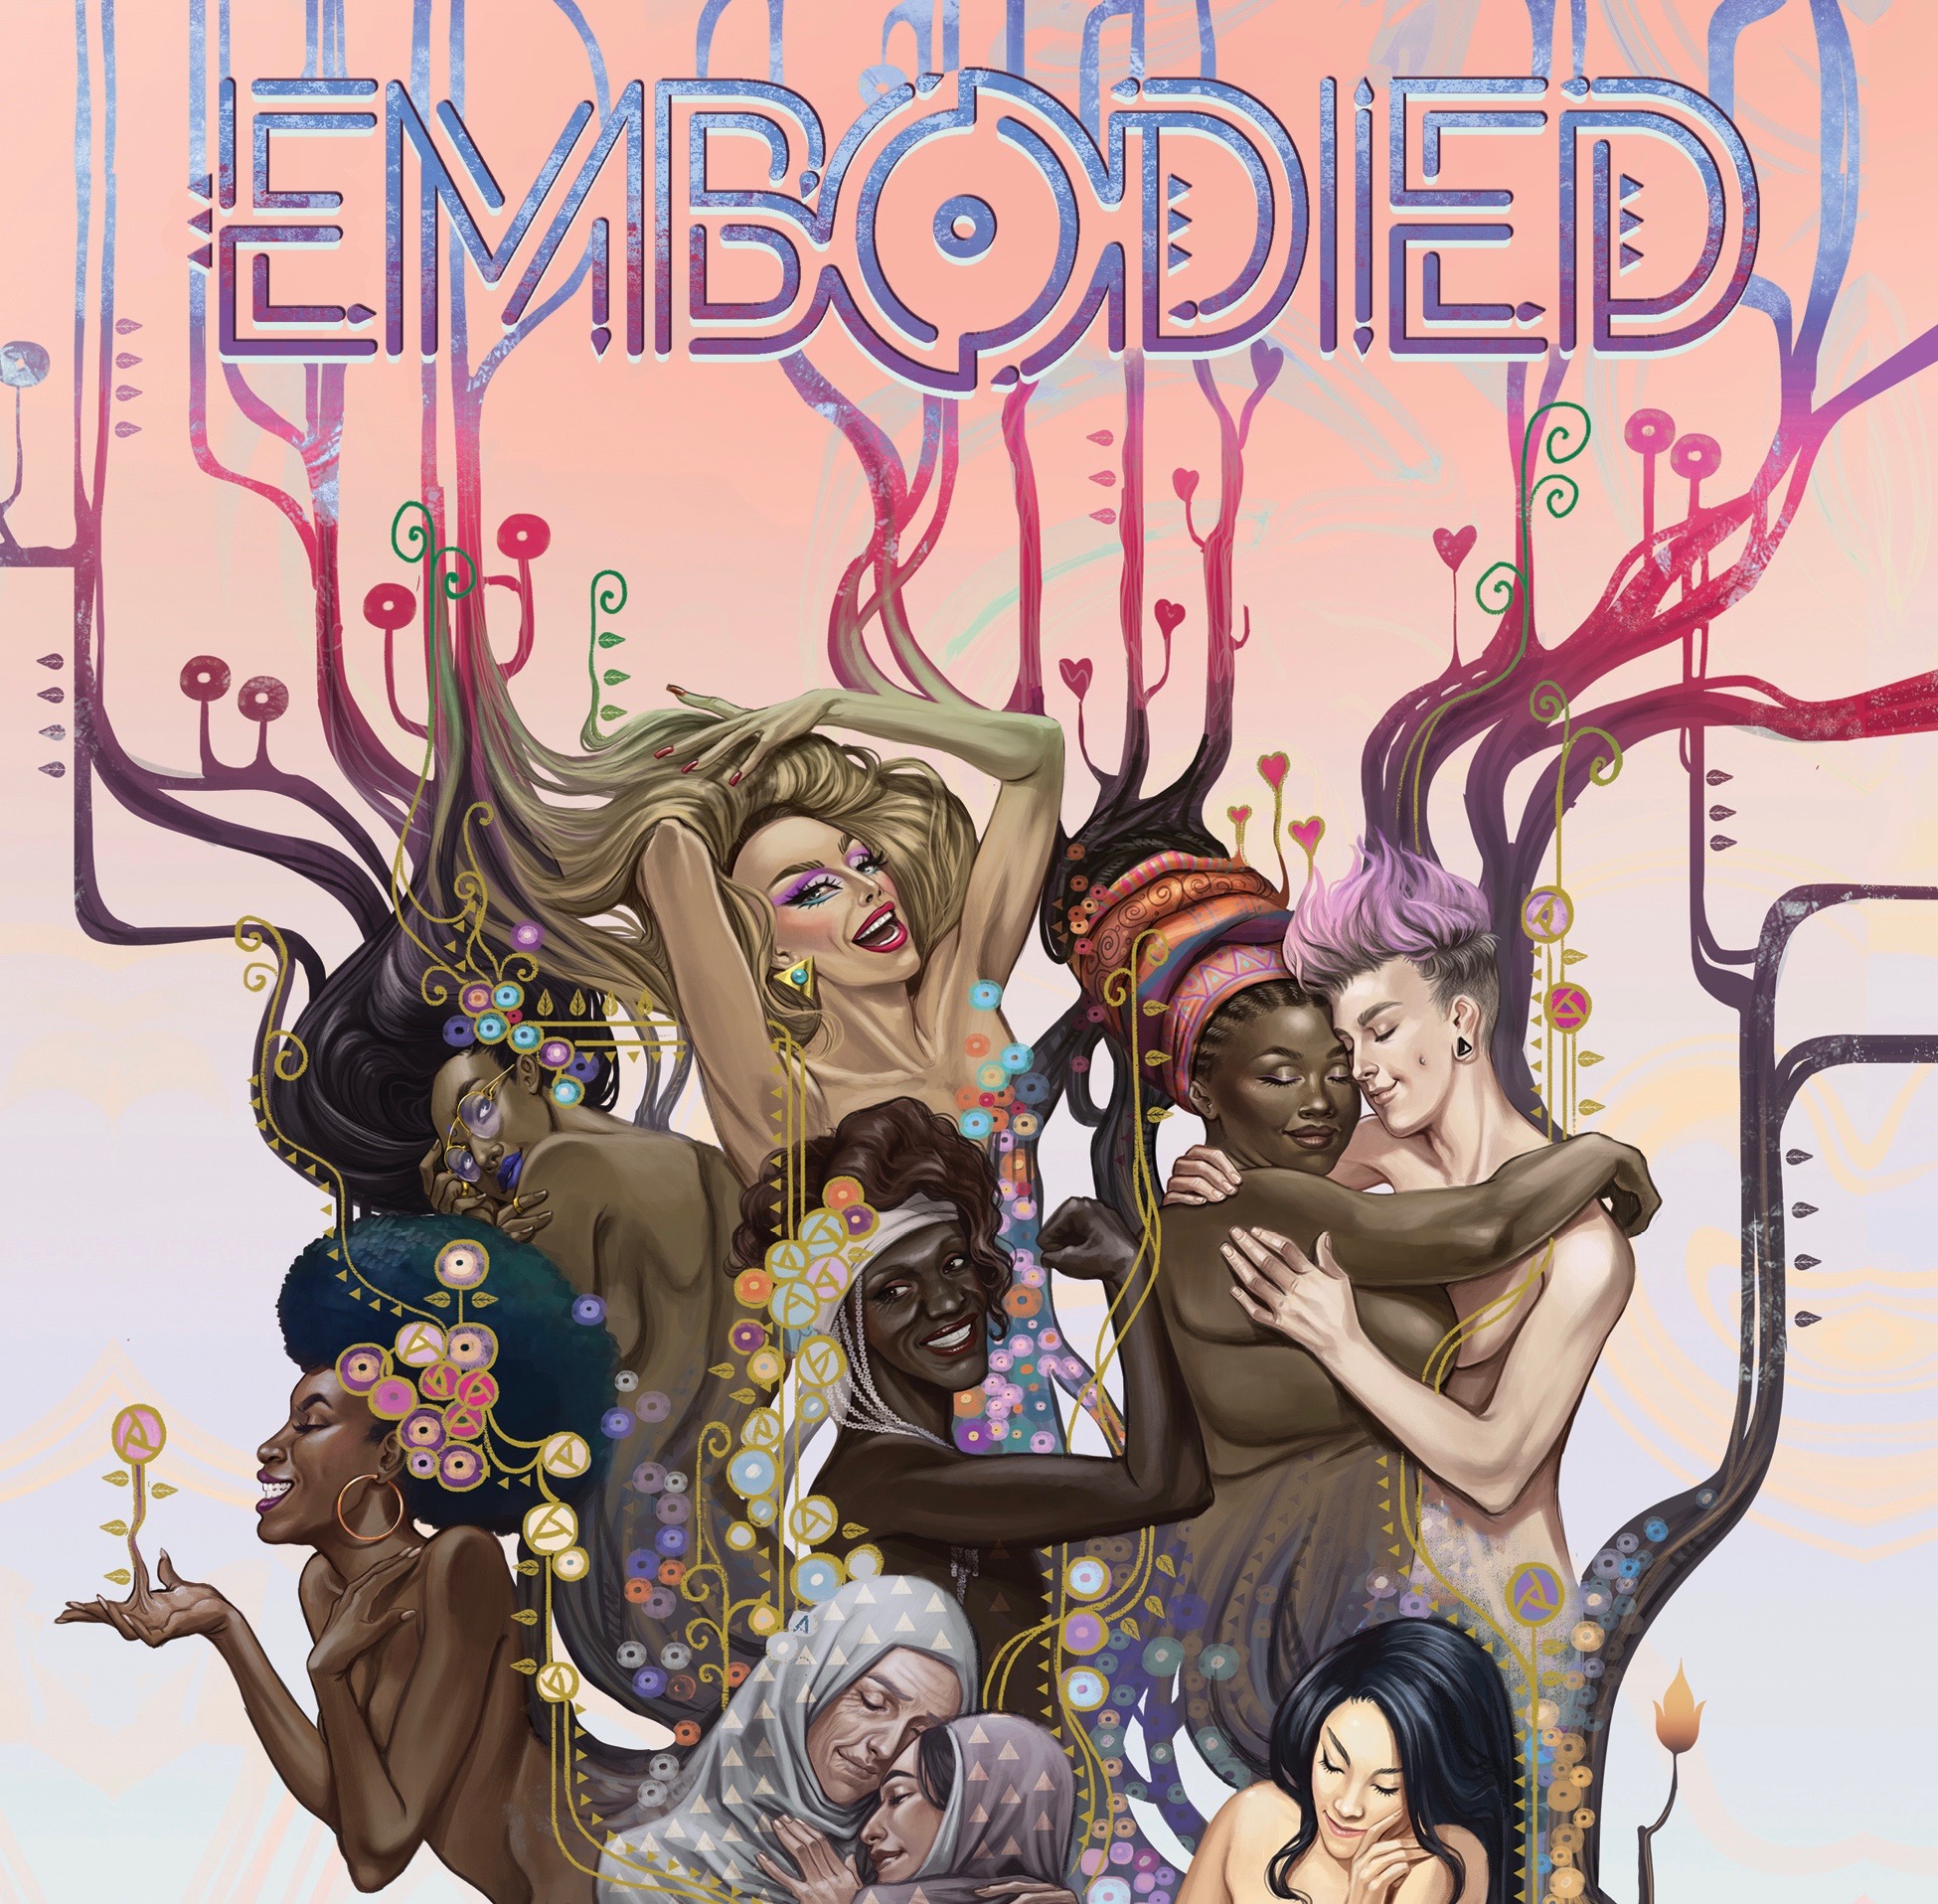 Illustration depicting multiple persons of different genders and skin tones – presumably female, femme-identifying, non-binary – in different poses, against a light pink background. Stylized text at the top reads "Embodied"